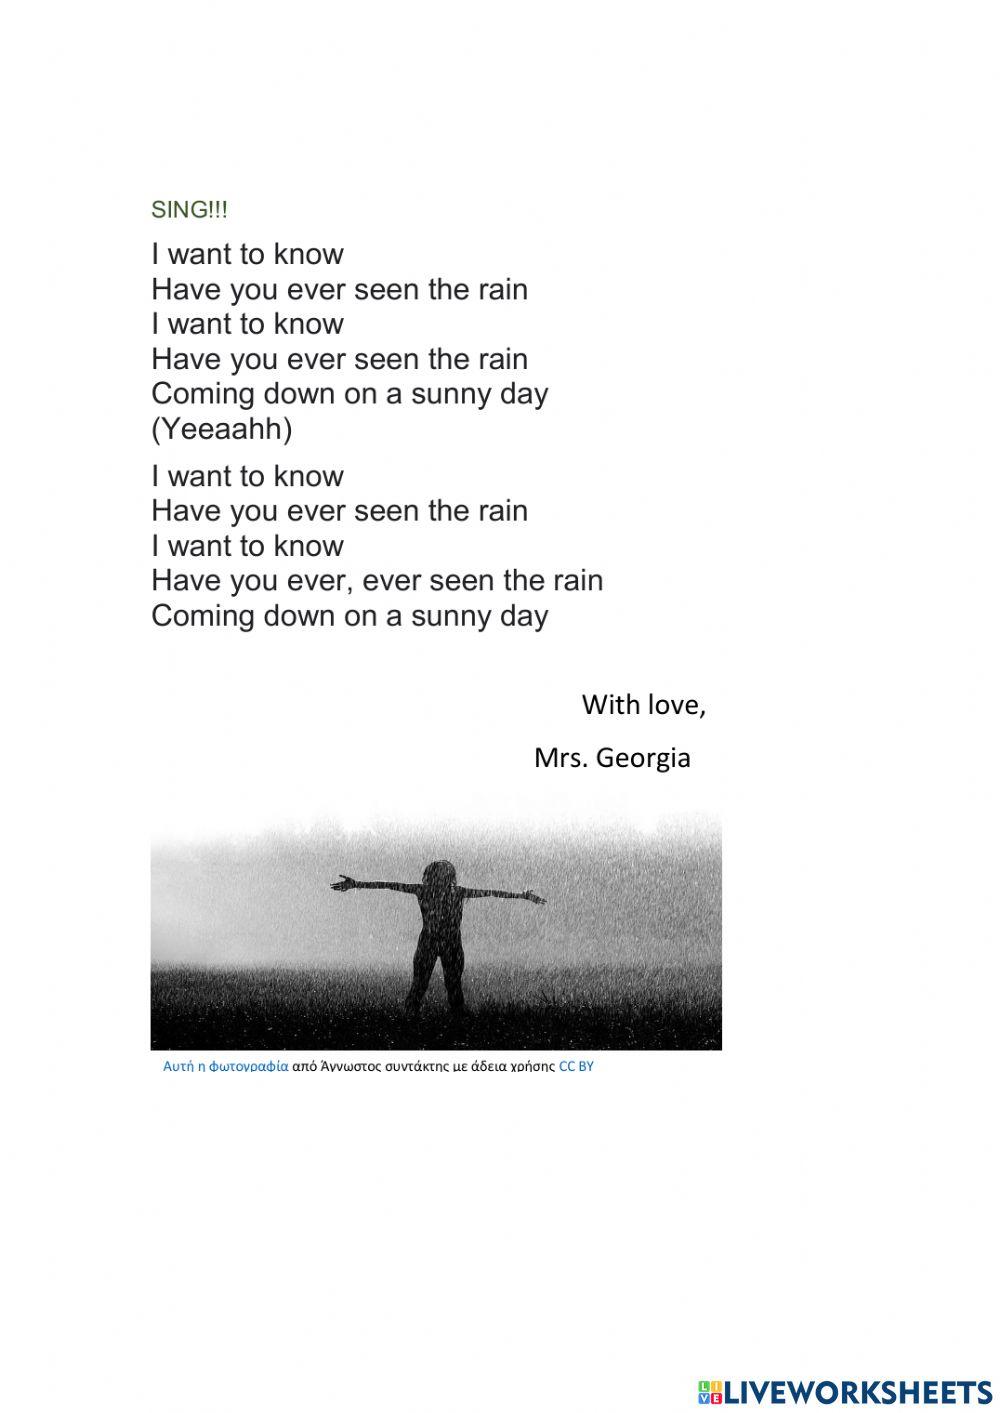 Song: Have you ever seen the rain?